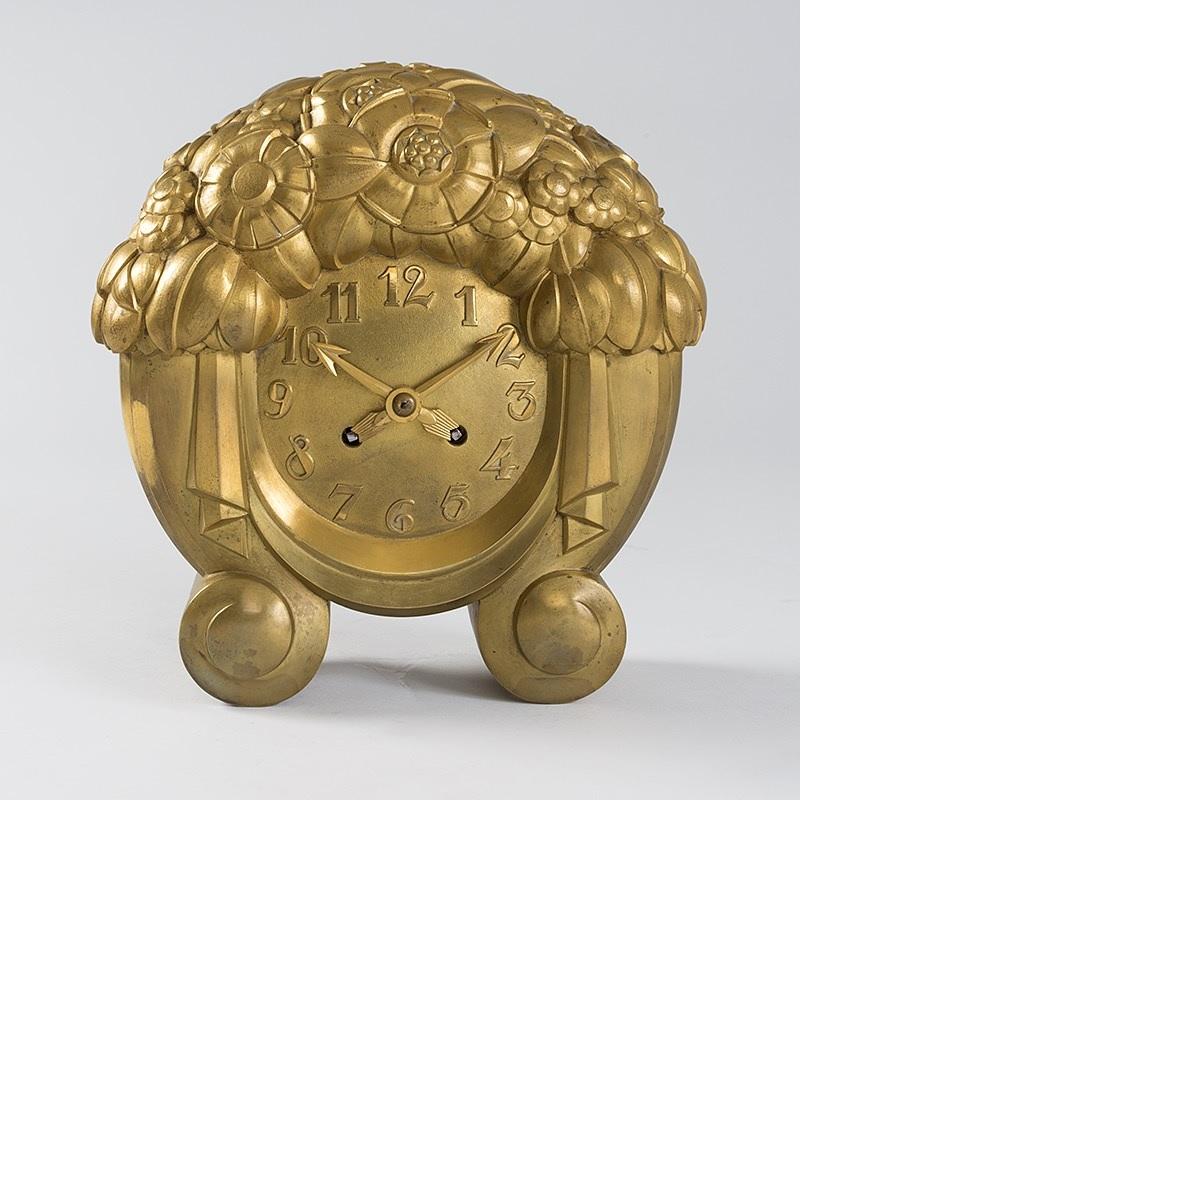 A French Süe et Mare gilt bronze mantel clock by André Mare. Model #5524, the twin train movement with lever platform escapement striking on a bell. Circa 1925.

In 1919 Louis Süe and André Mare founded the Compagnie des arts français (French Arts